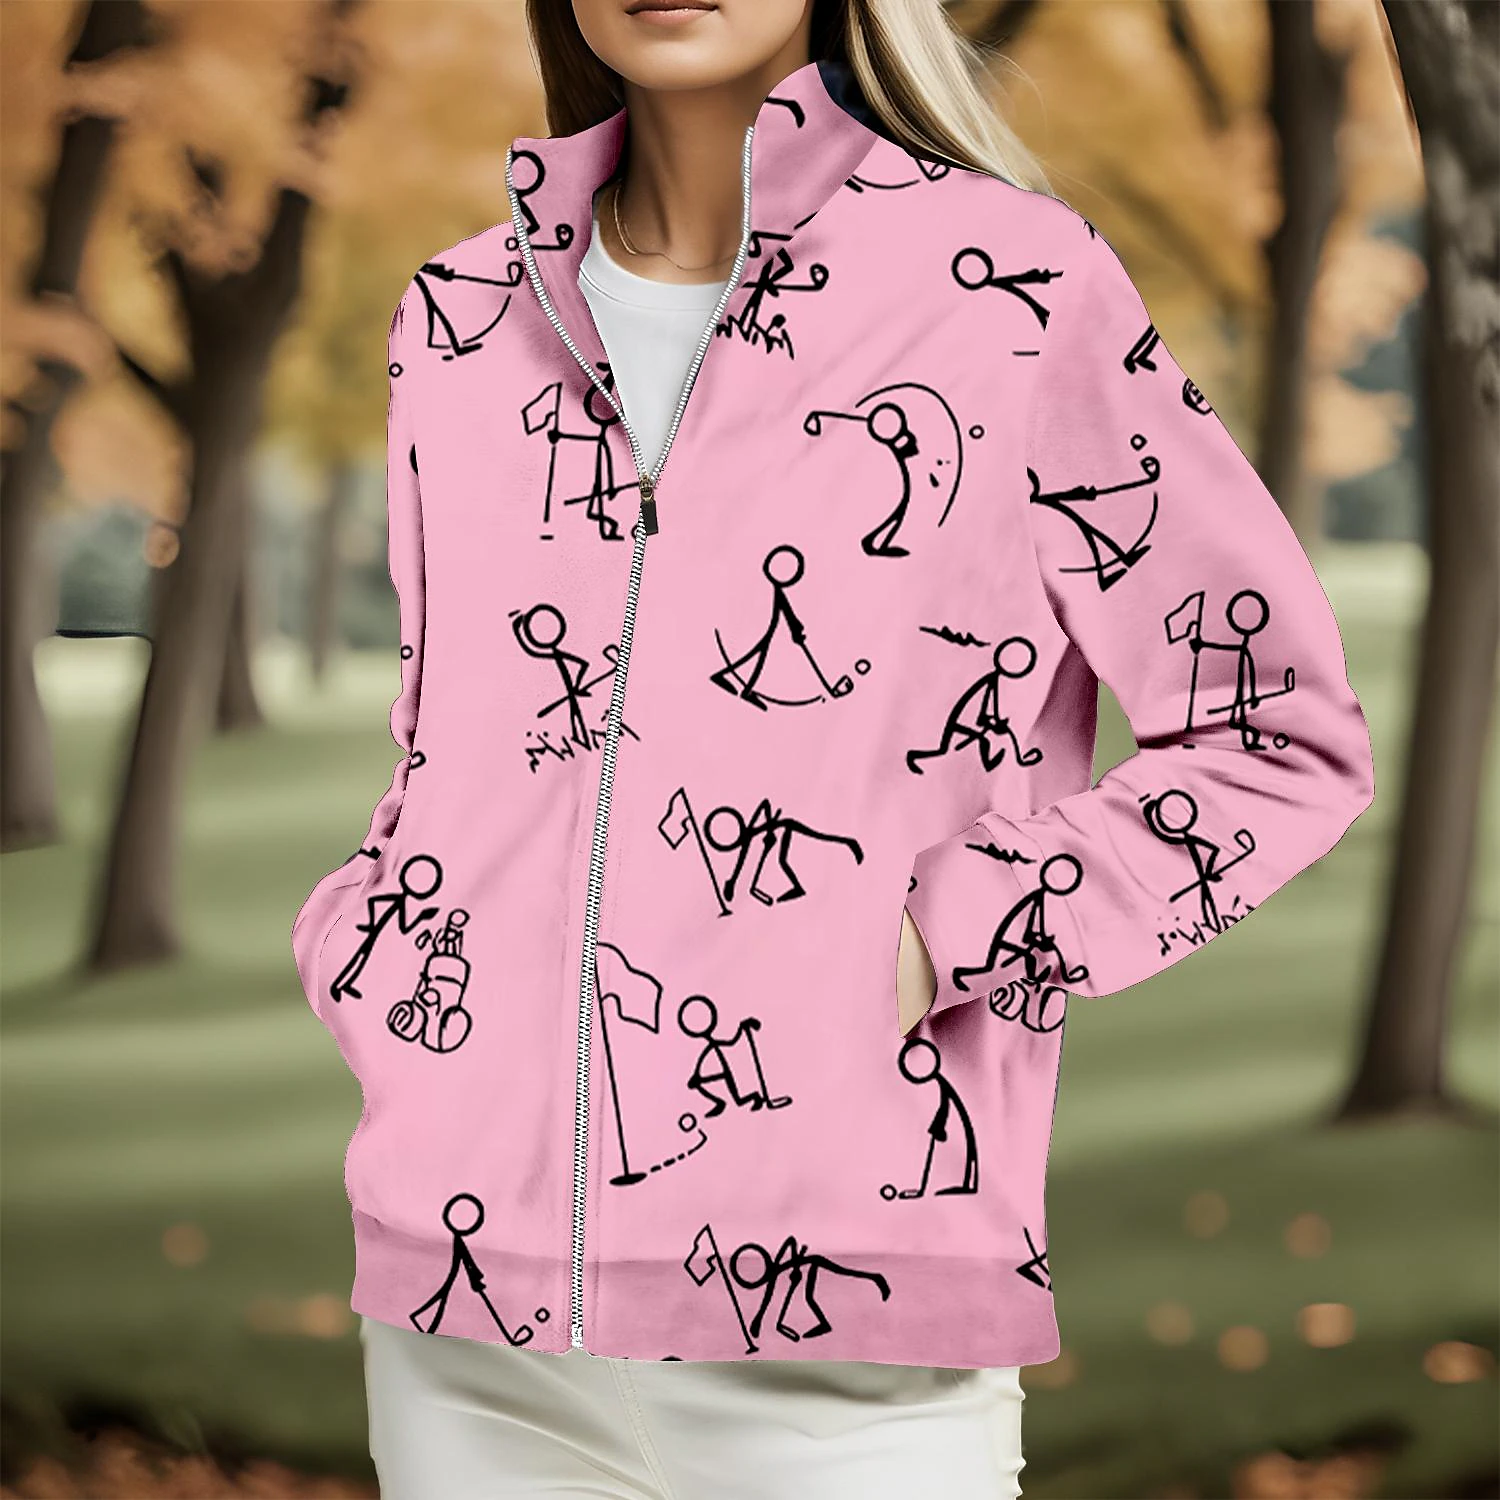 Women's Golf Hoodie Golf Pullover Golf Sweatshirt Thermal Warm Breathable Moisture Wicking Long Sleeve Golf Outerwear Top Regular Fit Side Pockets Full Zip Funny Printed Spring Autumn Tennis Golf 2023 - € 27.99 –P2